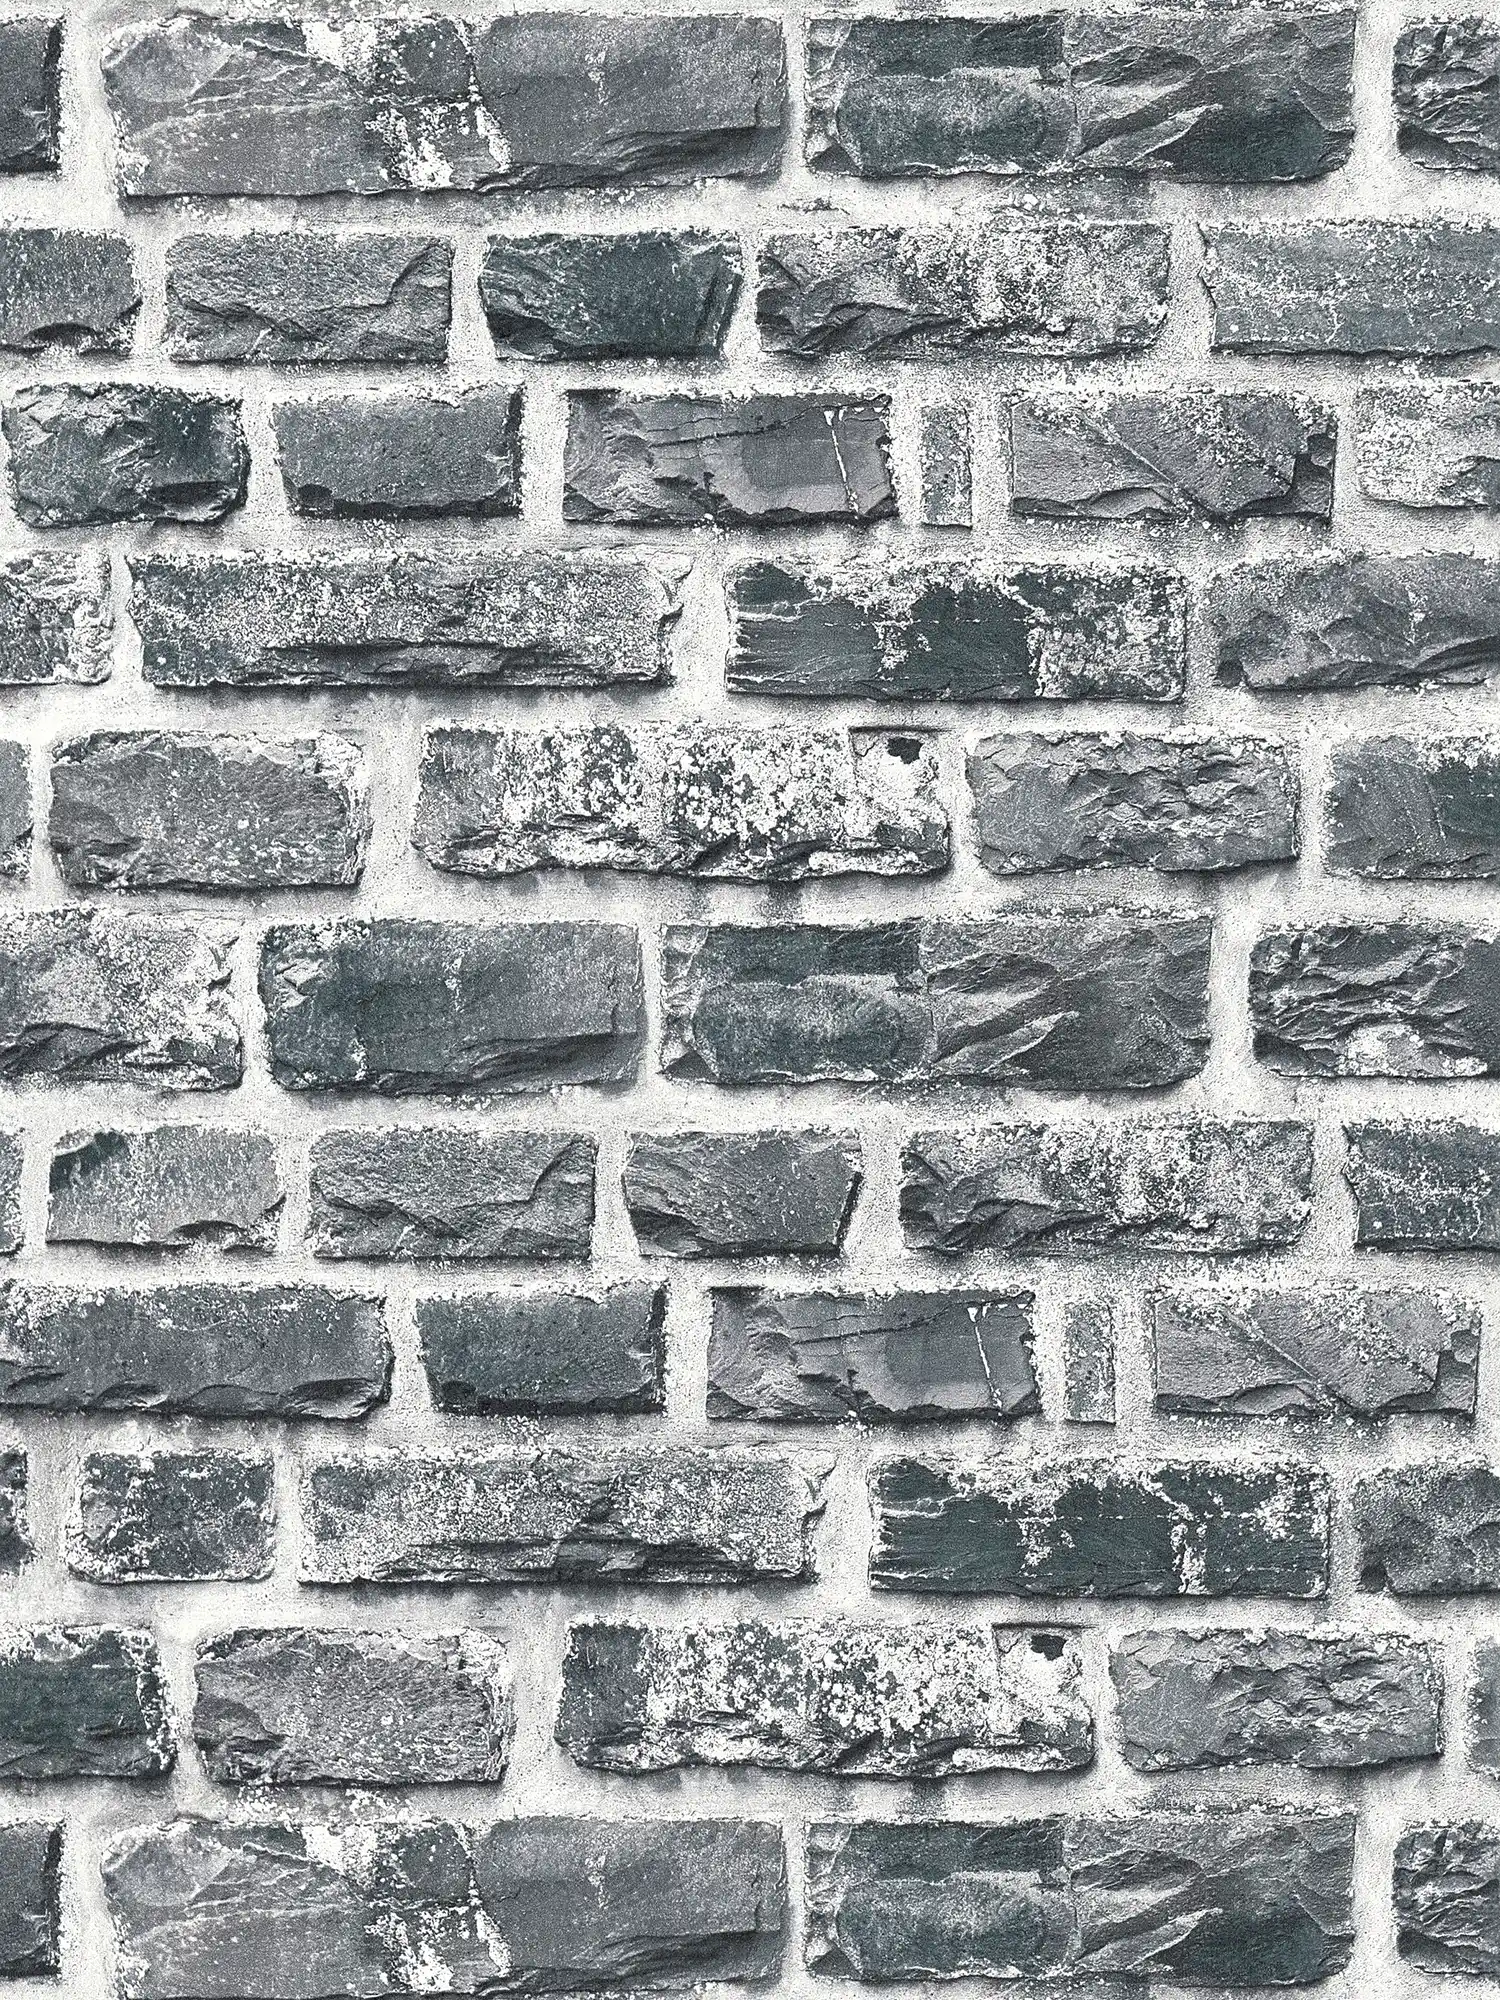         Wallpaper in stone look with quarry stones, natural stone - grey, black
    